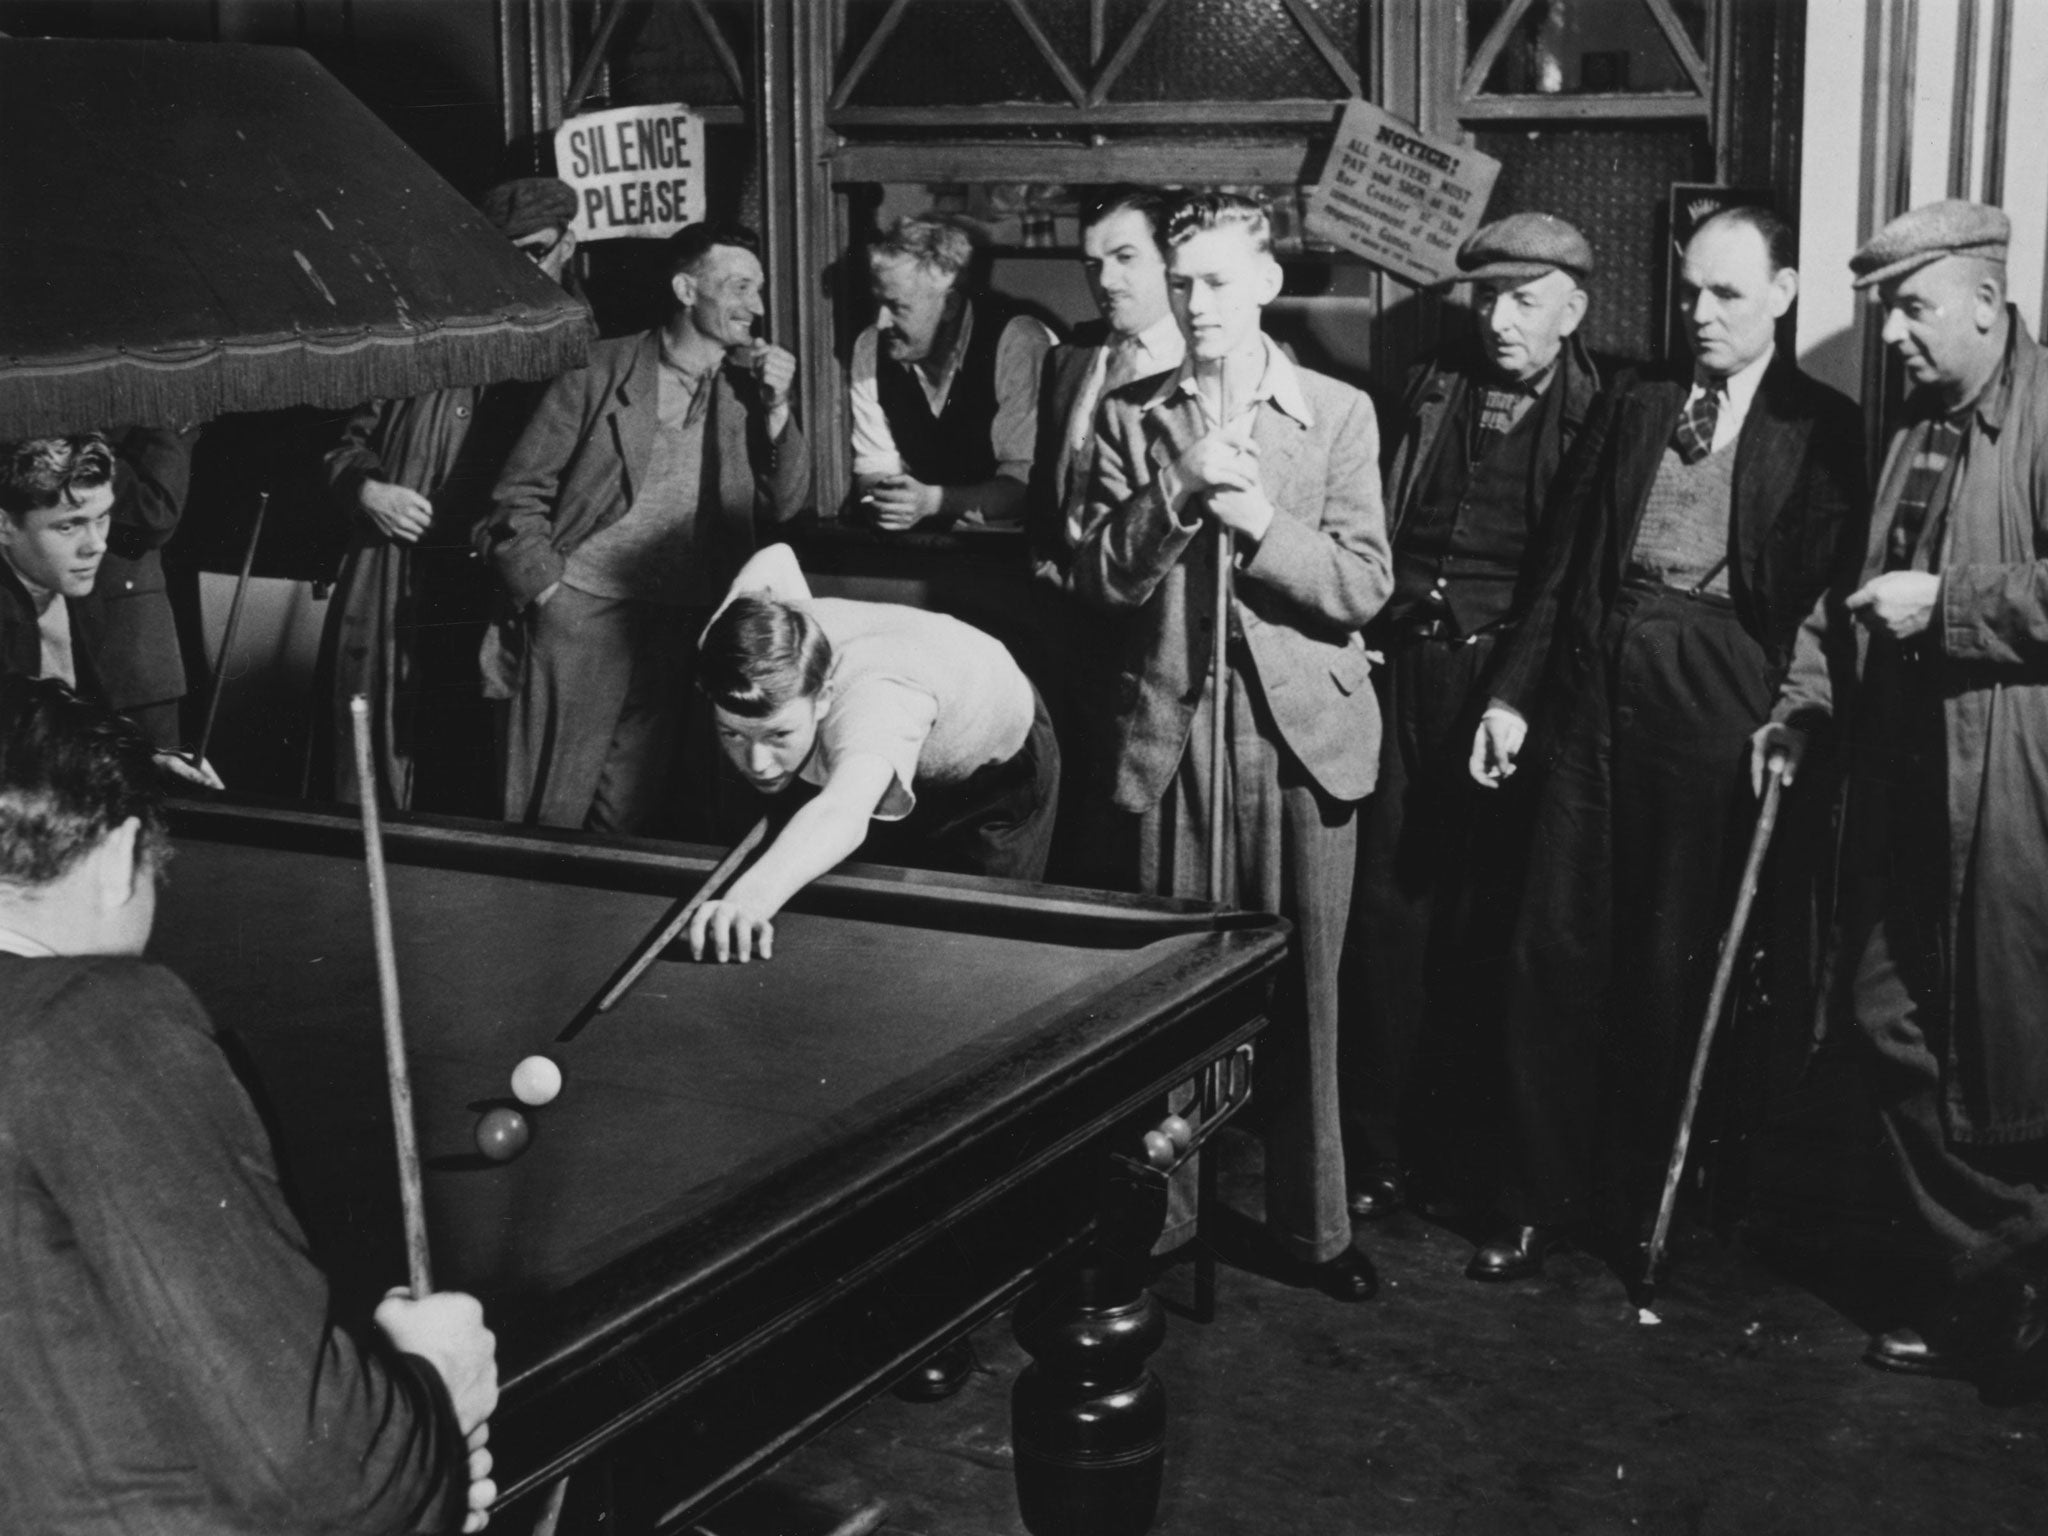 Young miners play billiards while their elders look on at the Workman's Institute in Gilfach Goch.